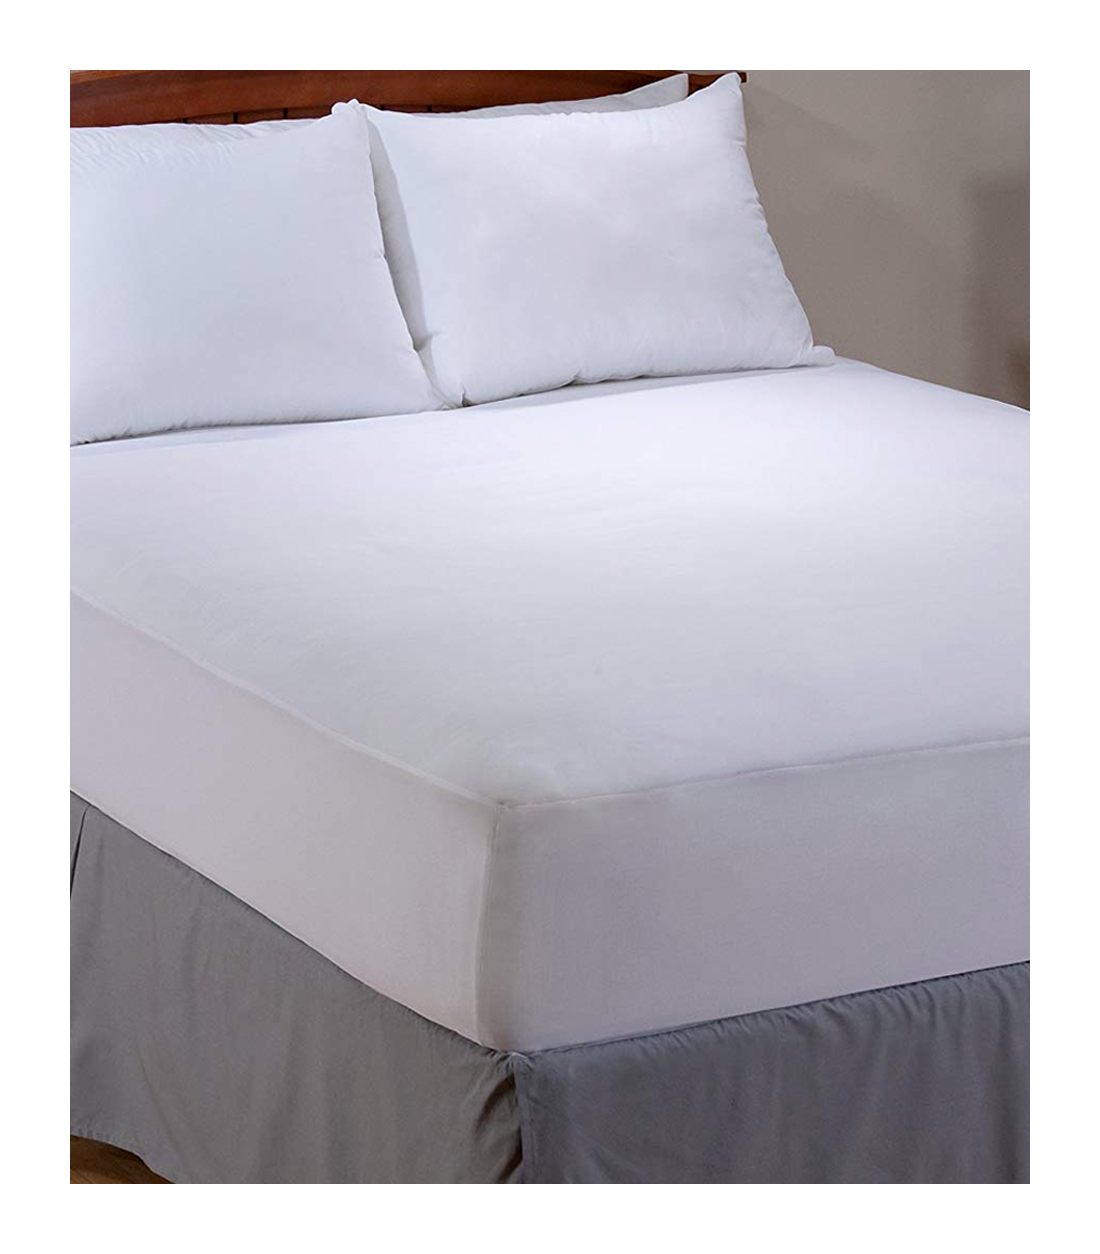 1. It can protect your bed from dust and critters.